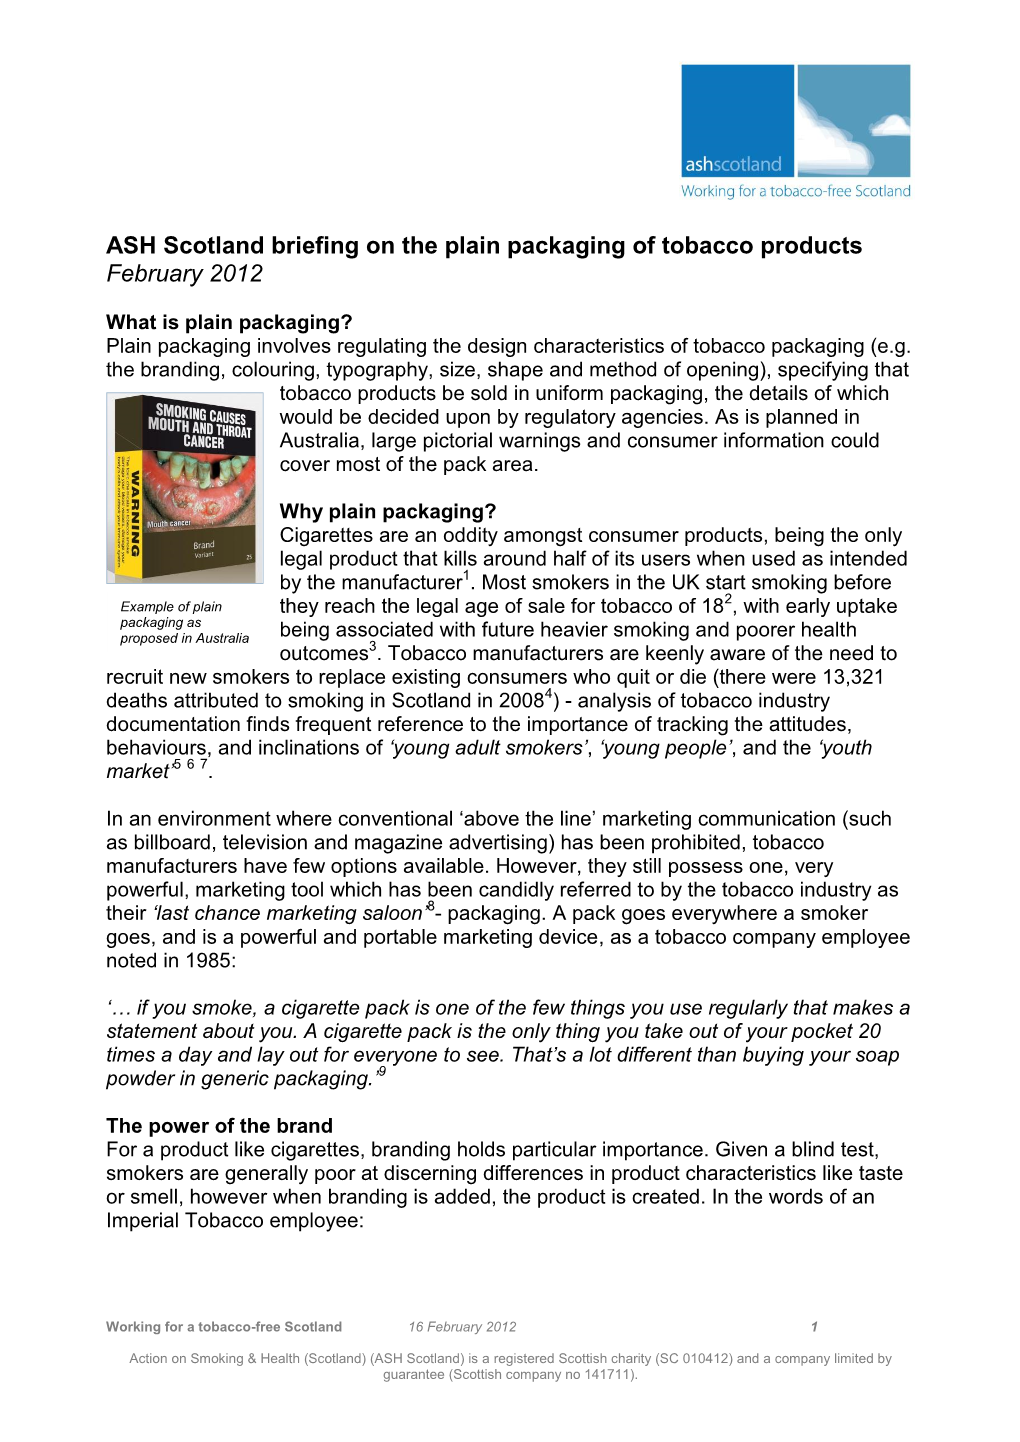 ASH Scotland Briefing on the Plain Packaging of Tobacco Products February 2012